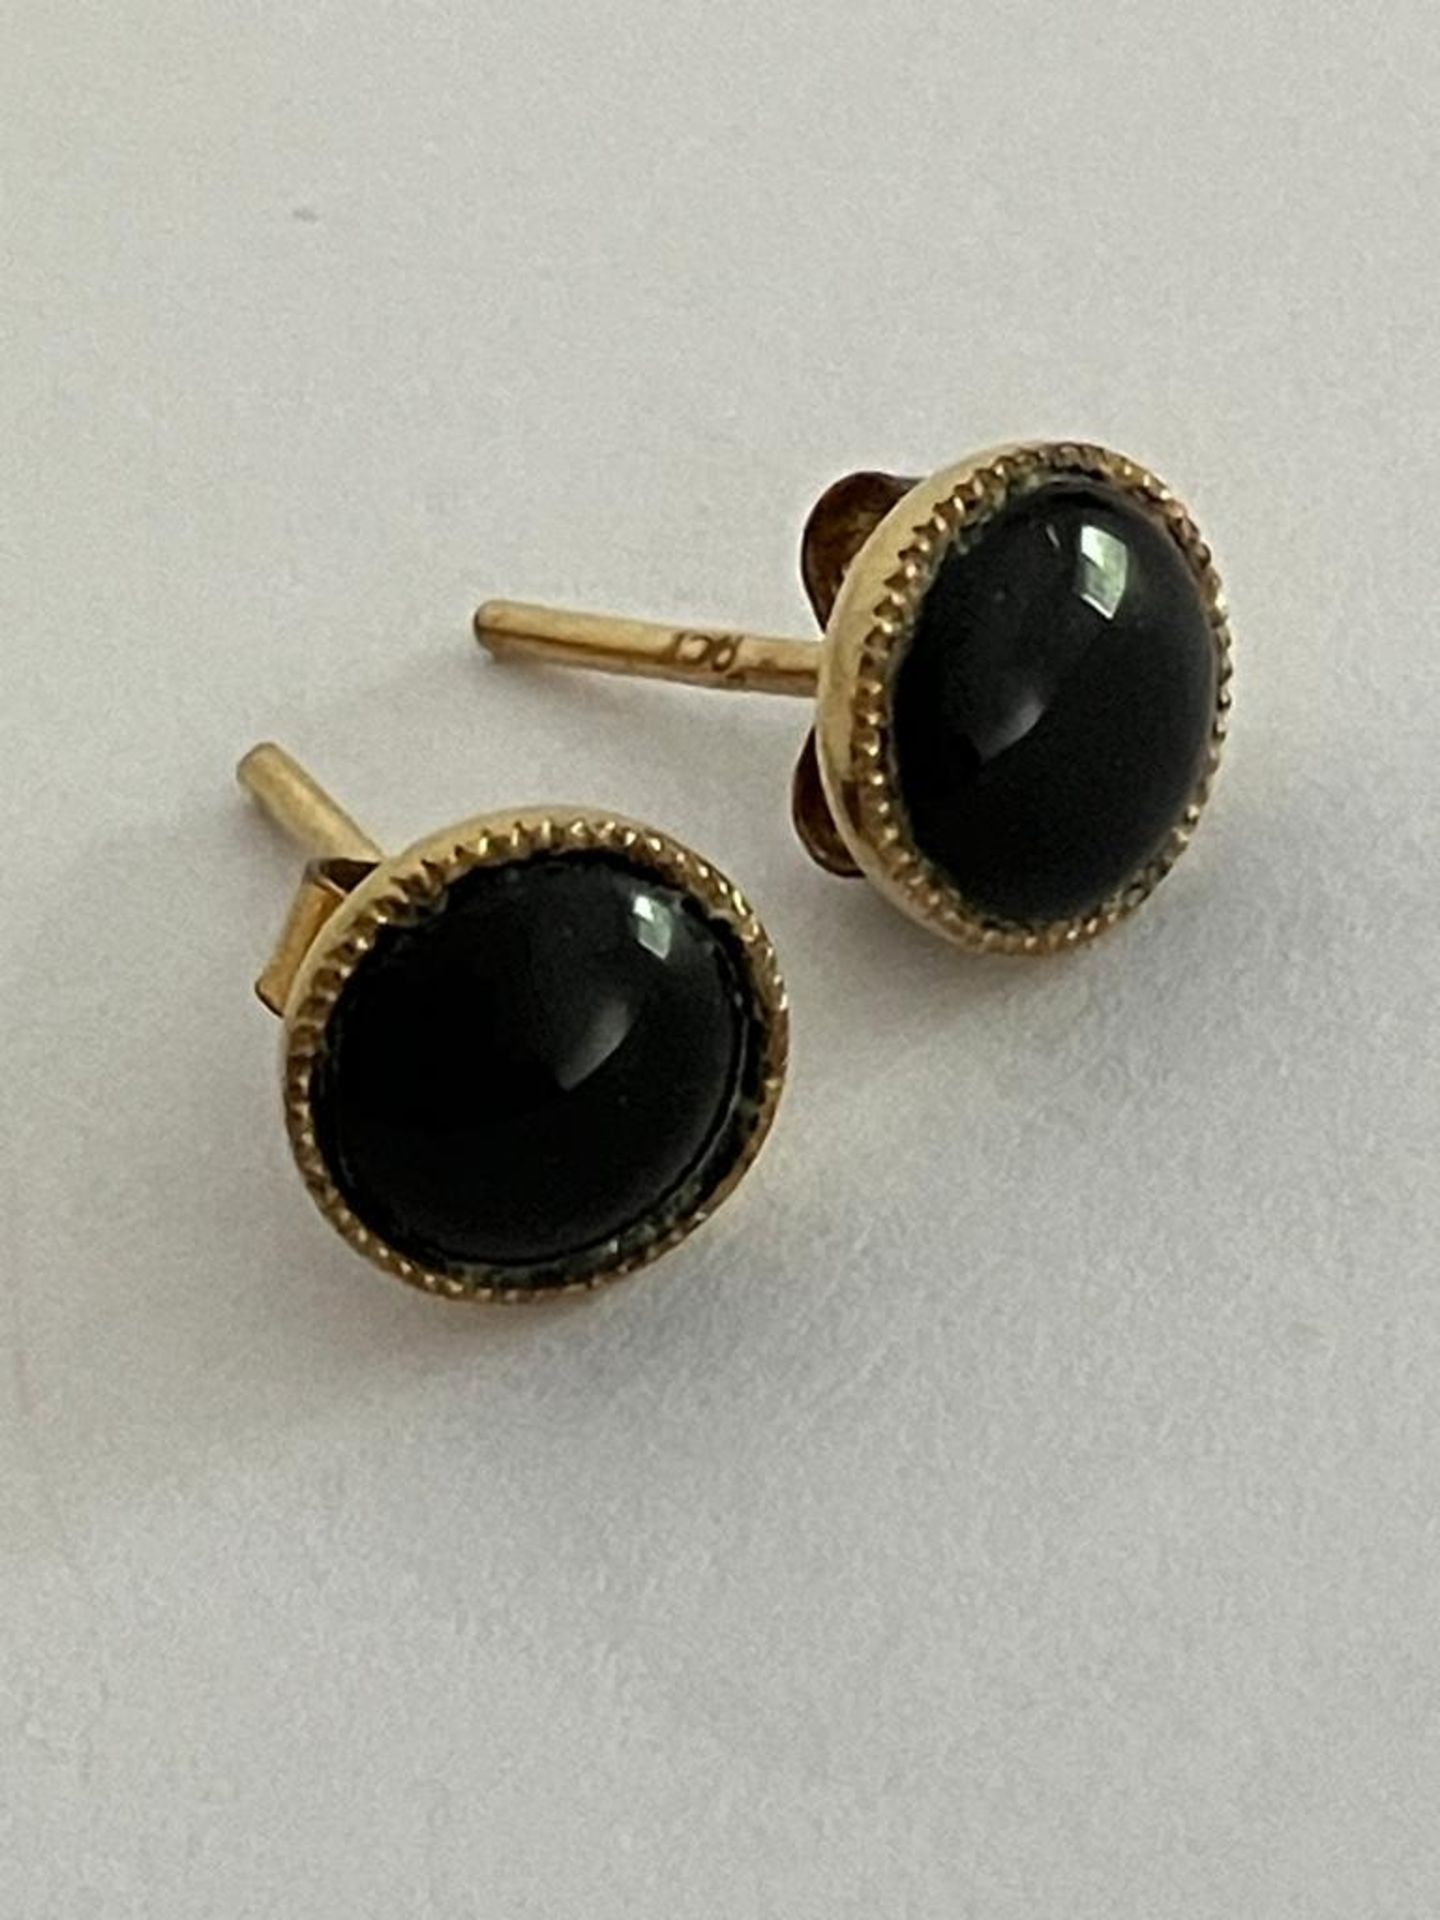 Pair of 9 carat GOLD EARRINGS with Cabachon Black Stone detail. Having 9ct GOLD backs..86 grams.